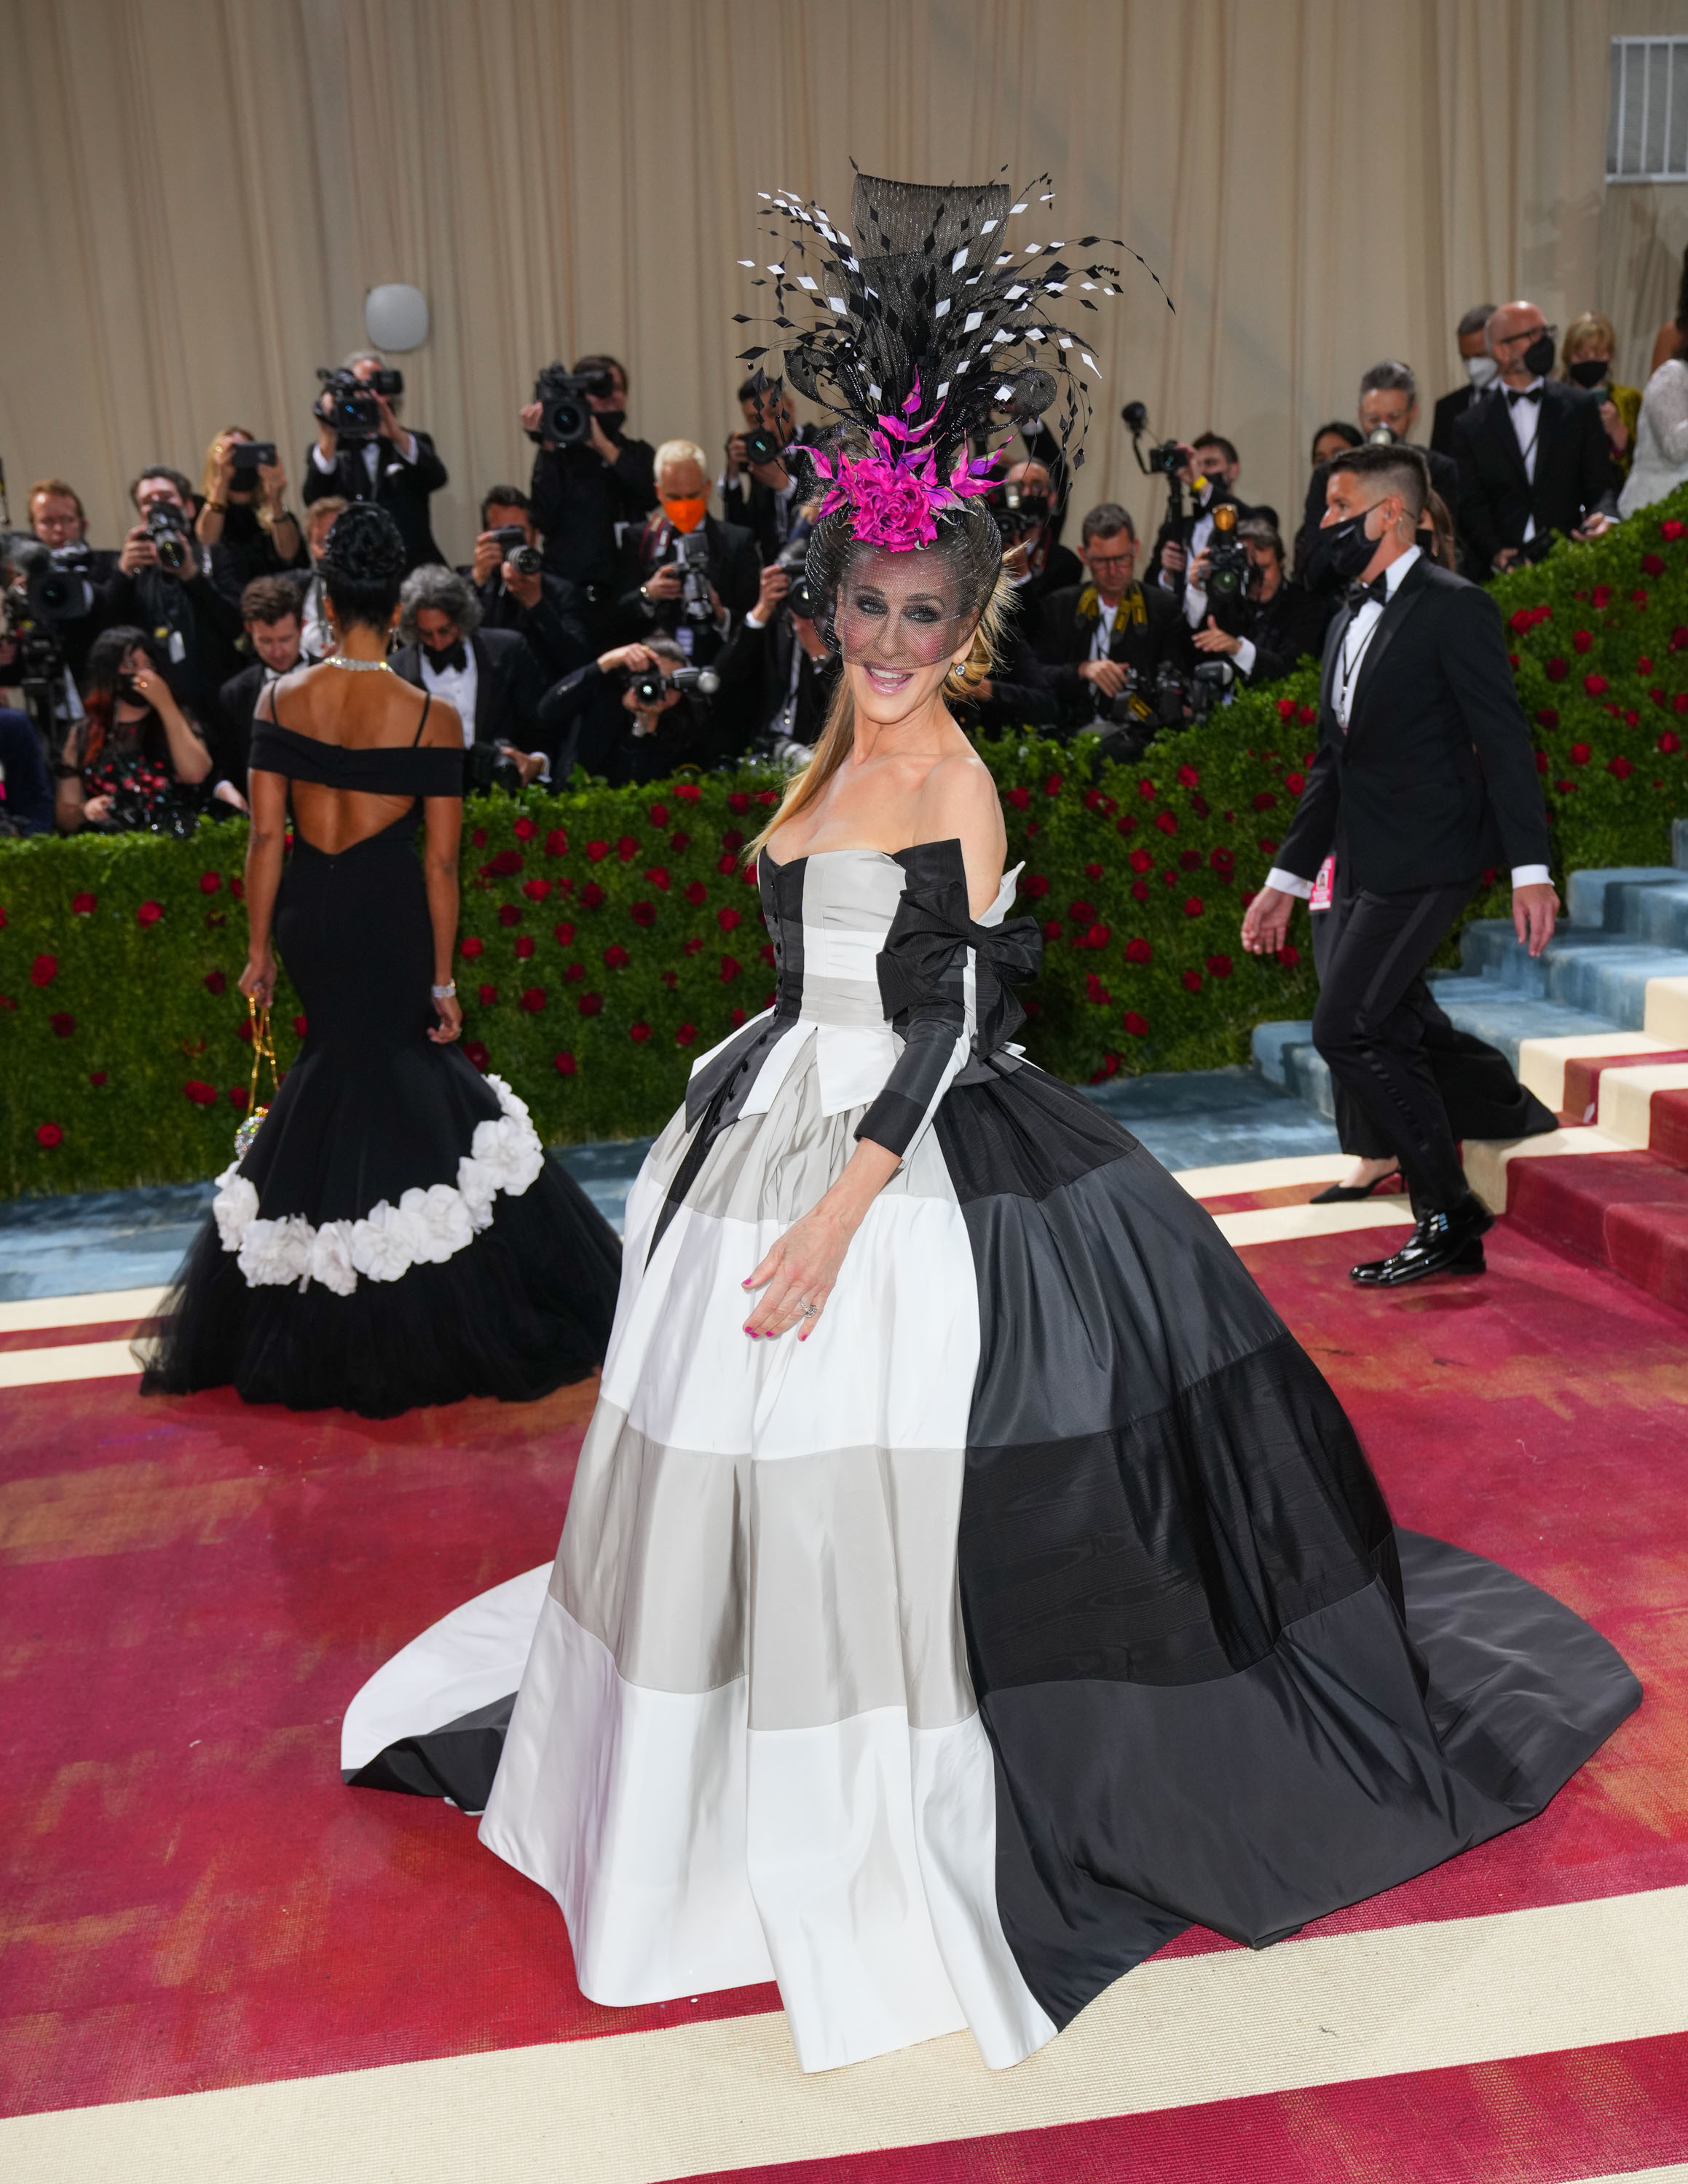 Person in elaborate black and white gown with voluminous skirt and striking feathered headpiece poses on steps at an event